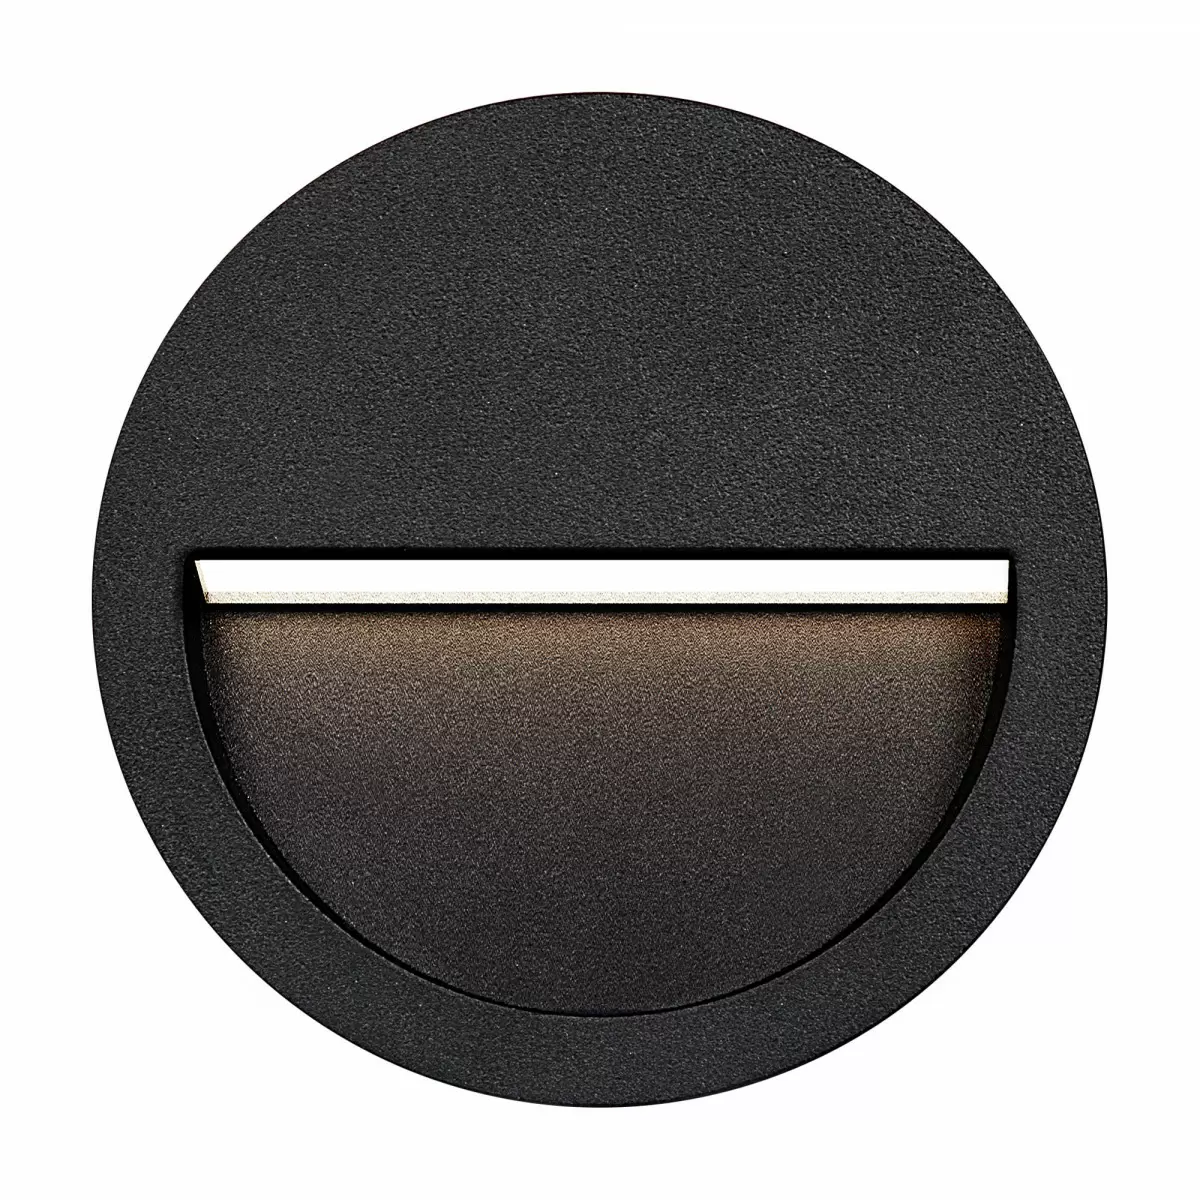 LED recessed wall light Section 2 | site outdoor lighting company